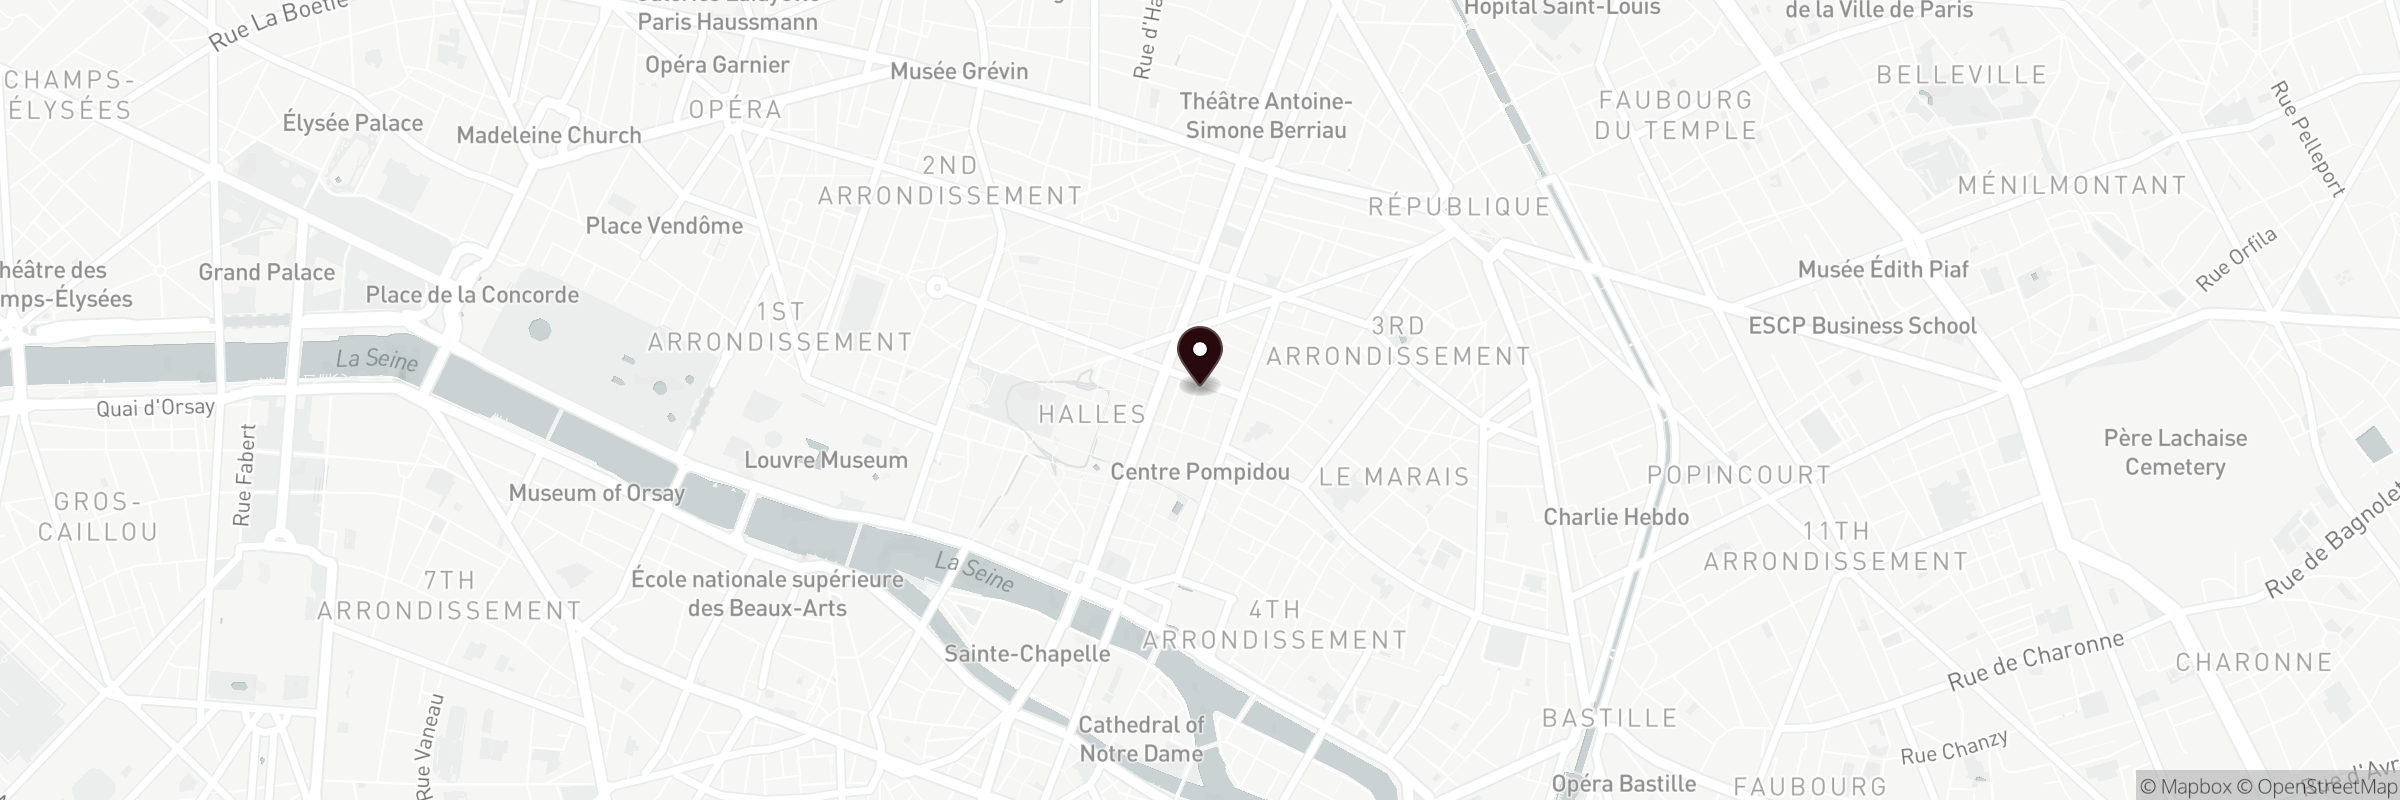 Map showing the address of Beaubourg